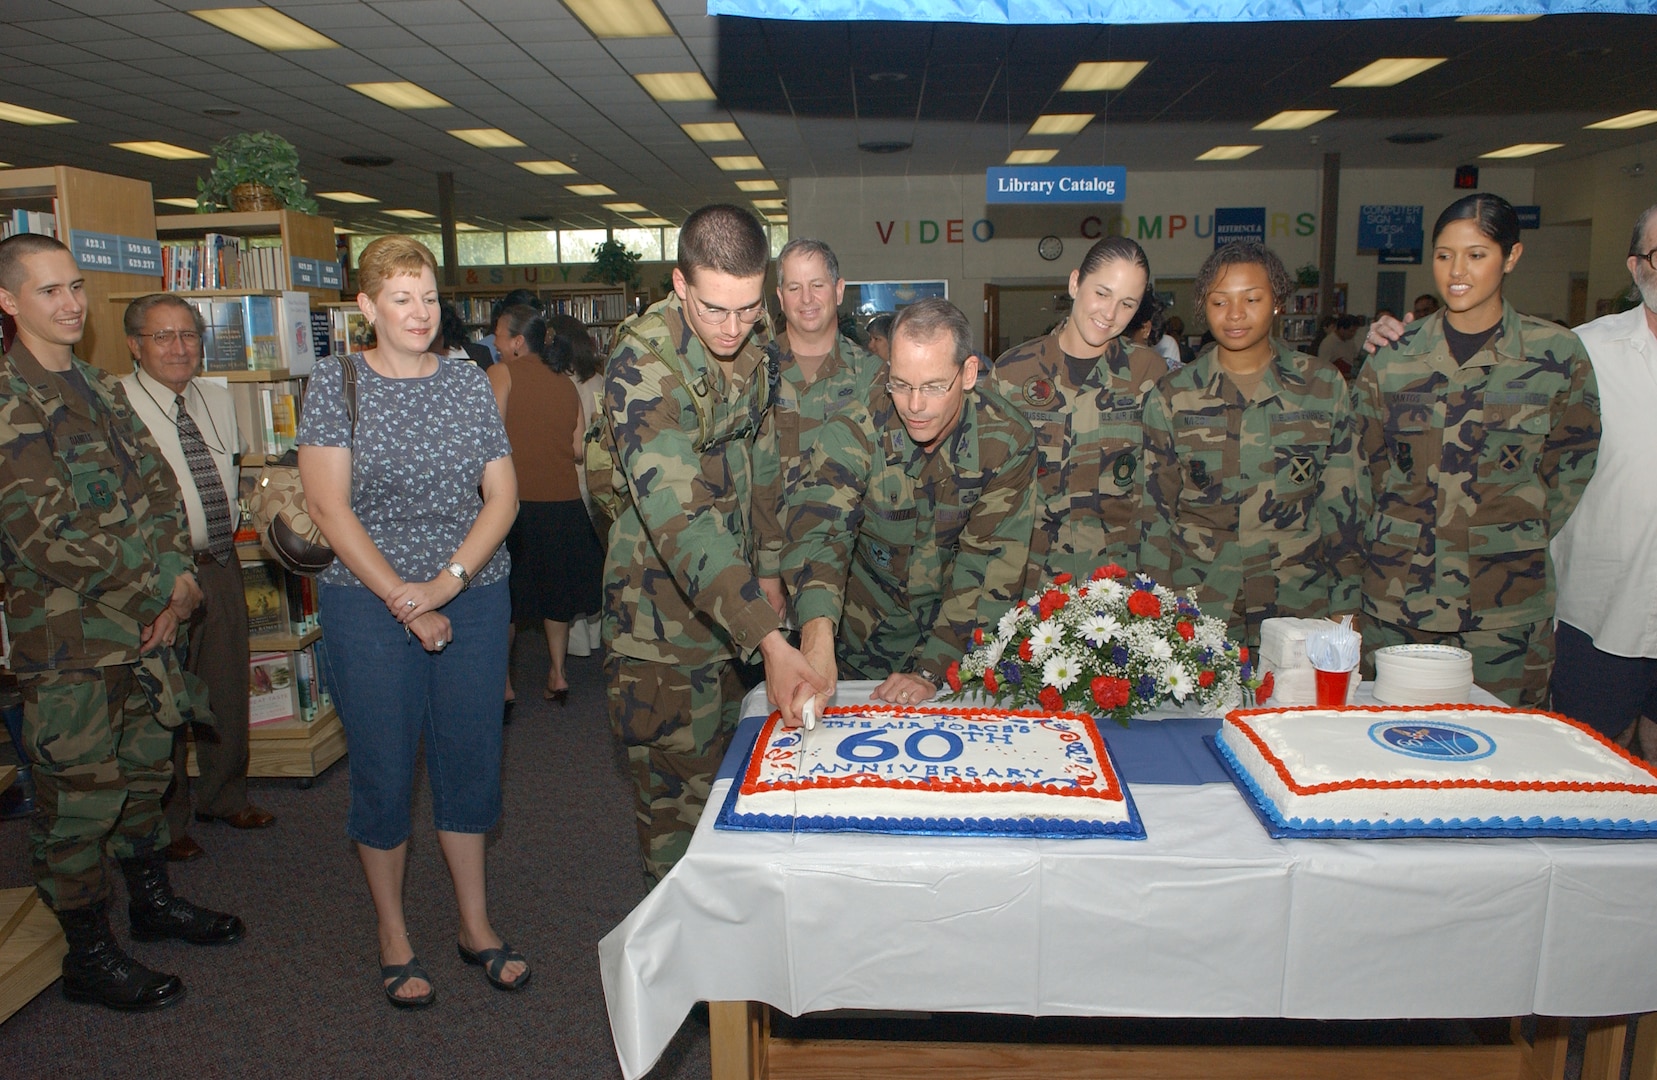 Col. Bob LaBrutta, 37th Mission Support Group commander, cuts a cake with Airman Basic Zachary Bruhn, 342nd Training Squadron, at the Lackland Base Library Sept. 17, 2007. The cake-cutting ceremony officially ended the week of festivities held in honor of the service's birthday. (USAF photo by Alan Boedeker)                                